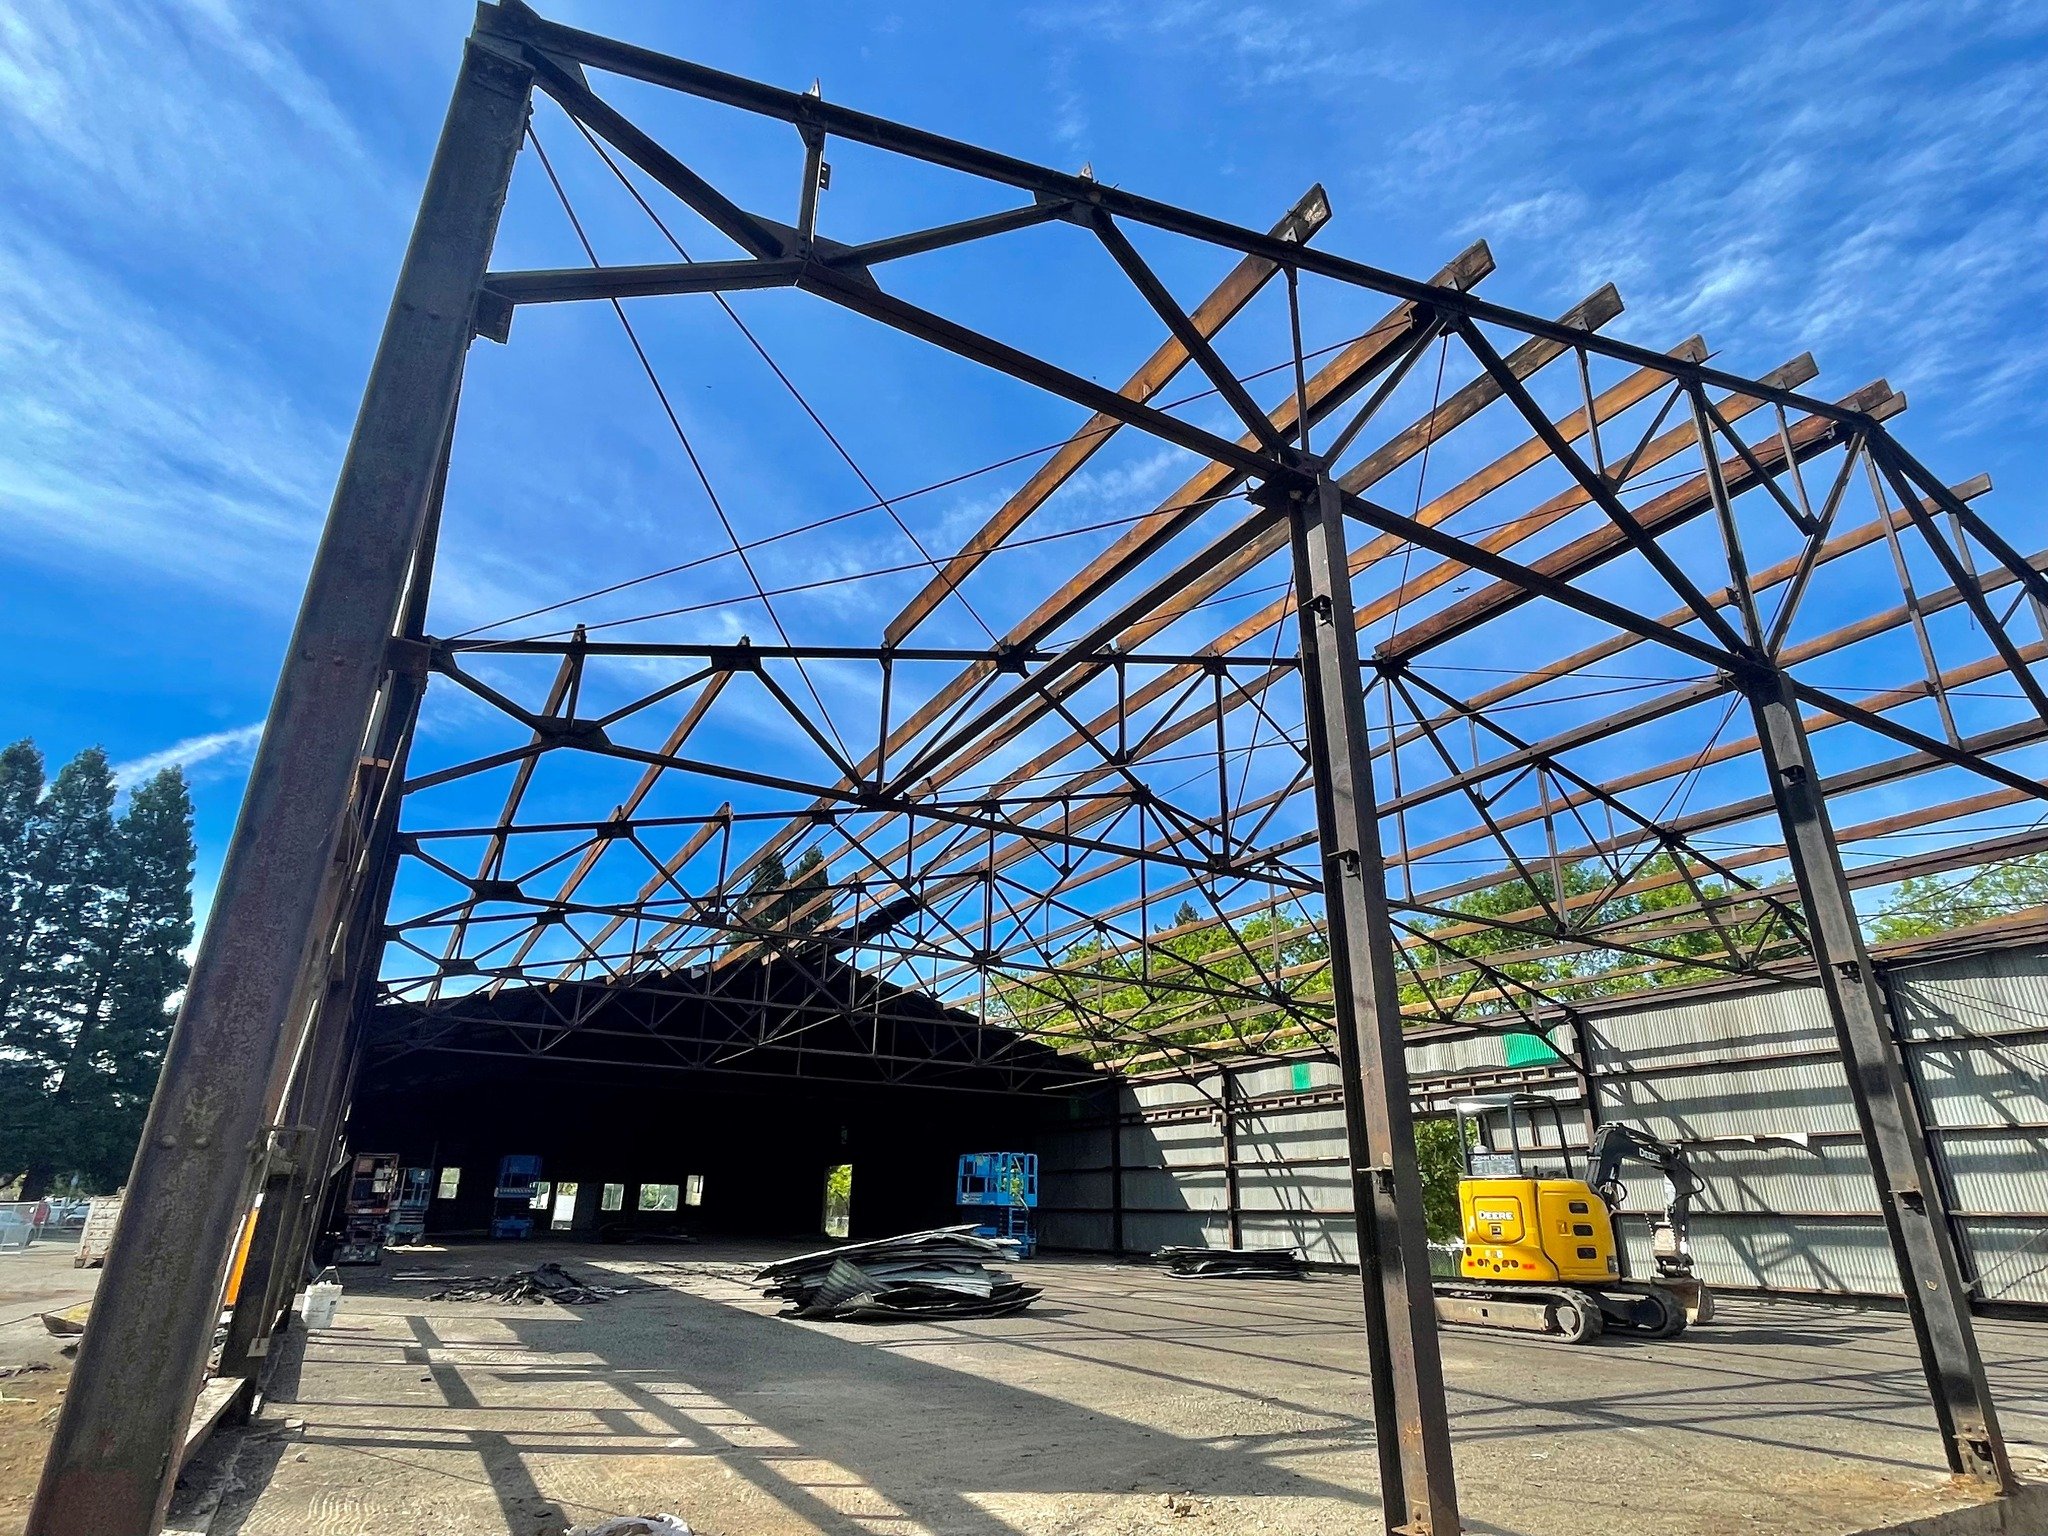 Construction is underway at the Foley Community Pavillion! 🚜

The pavilion is designed to be environmentally conscious, embracing an all-electric framework powered by Healdsburg&rsquo;s local public utility. Additionally, it incorporates features su